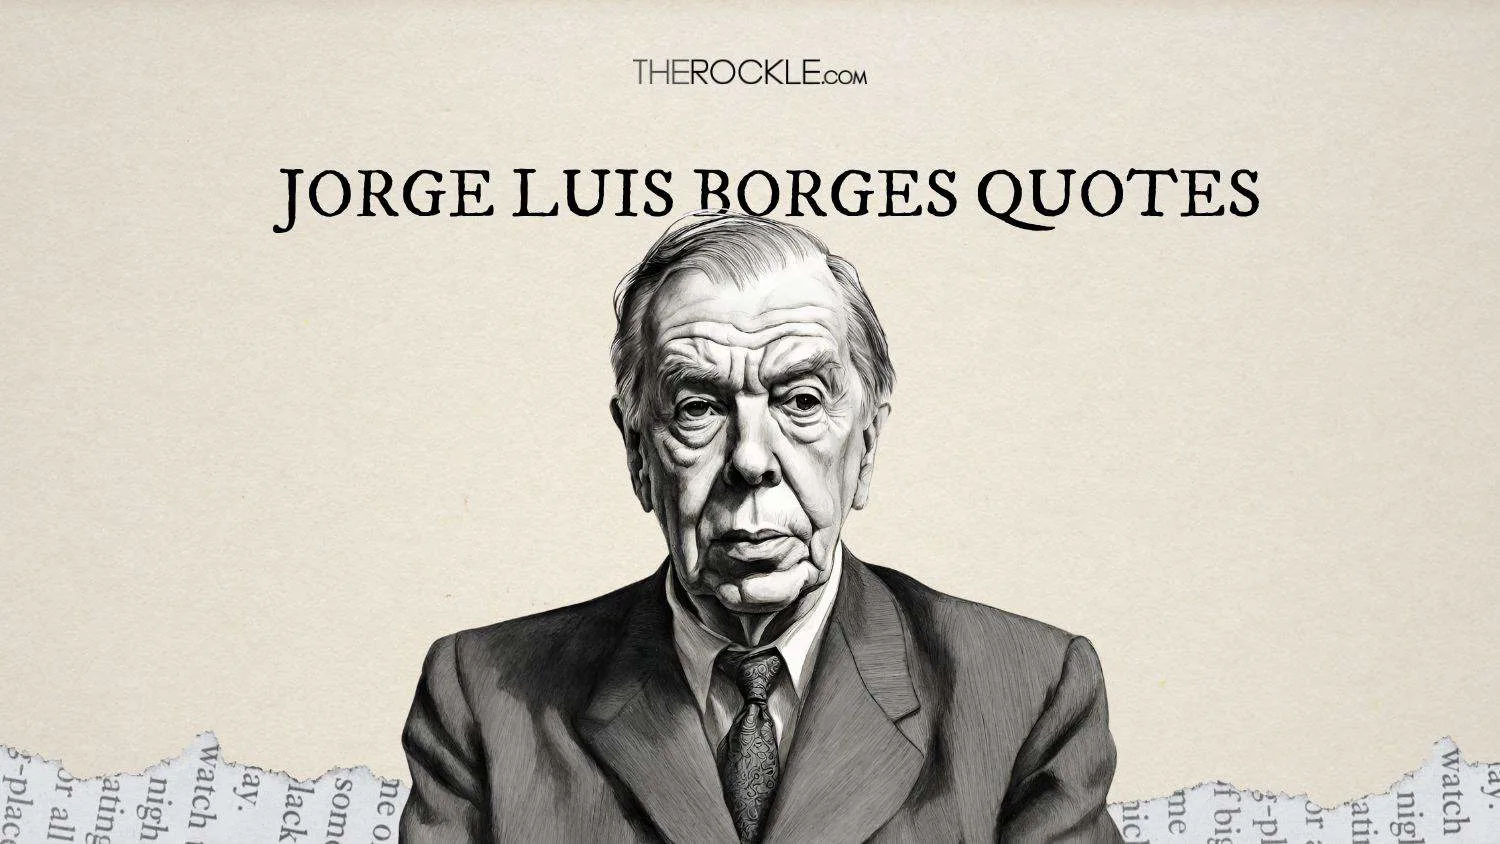 Drawing of Jorge Luis Borges